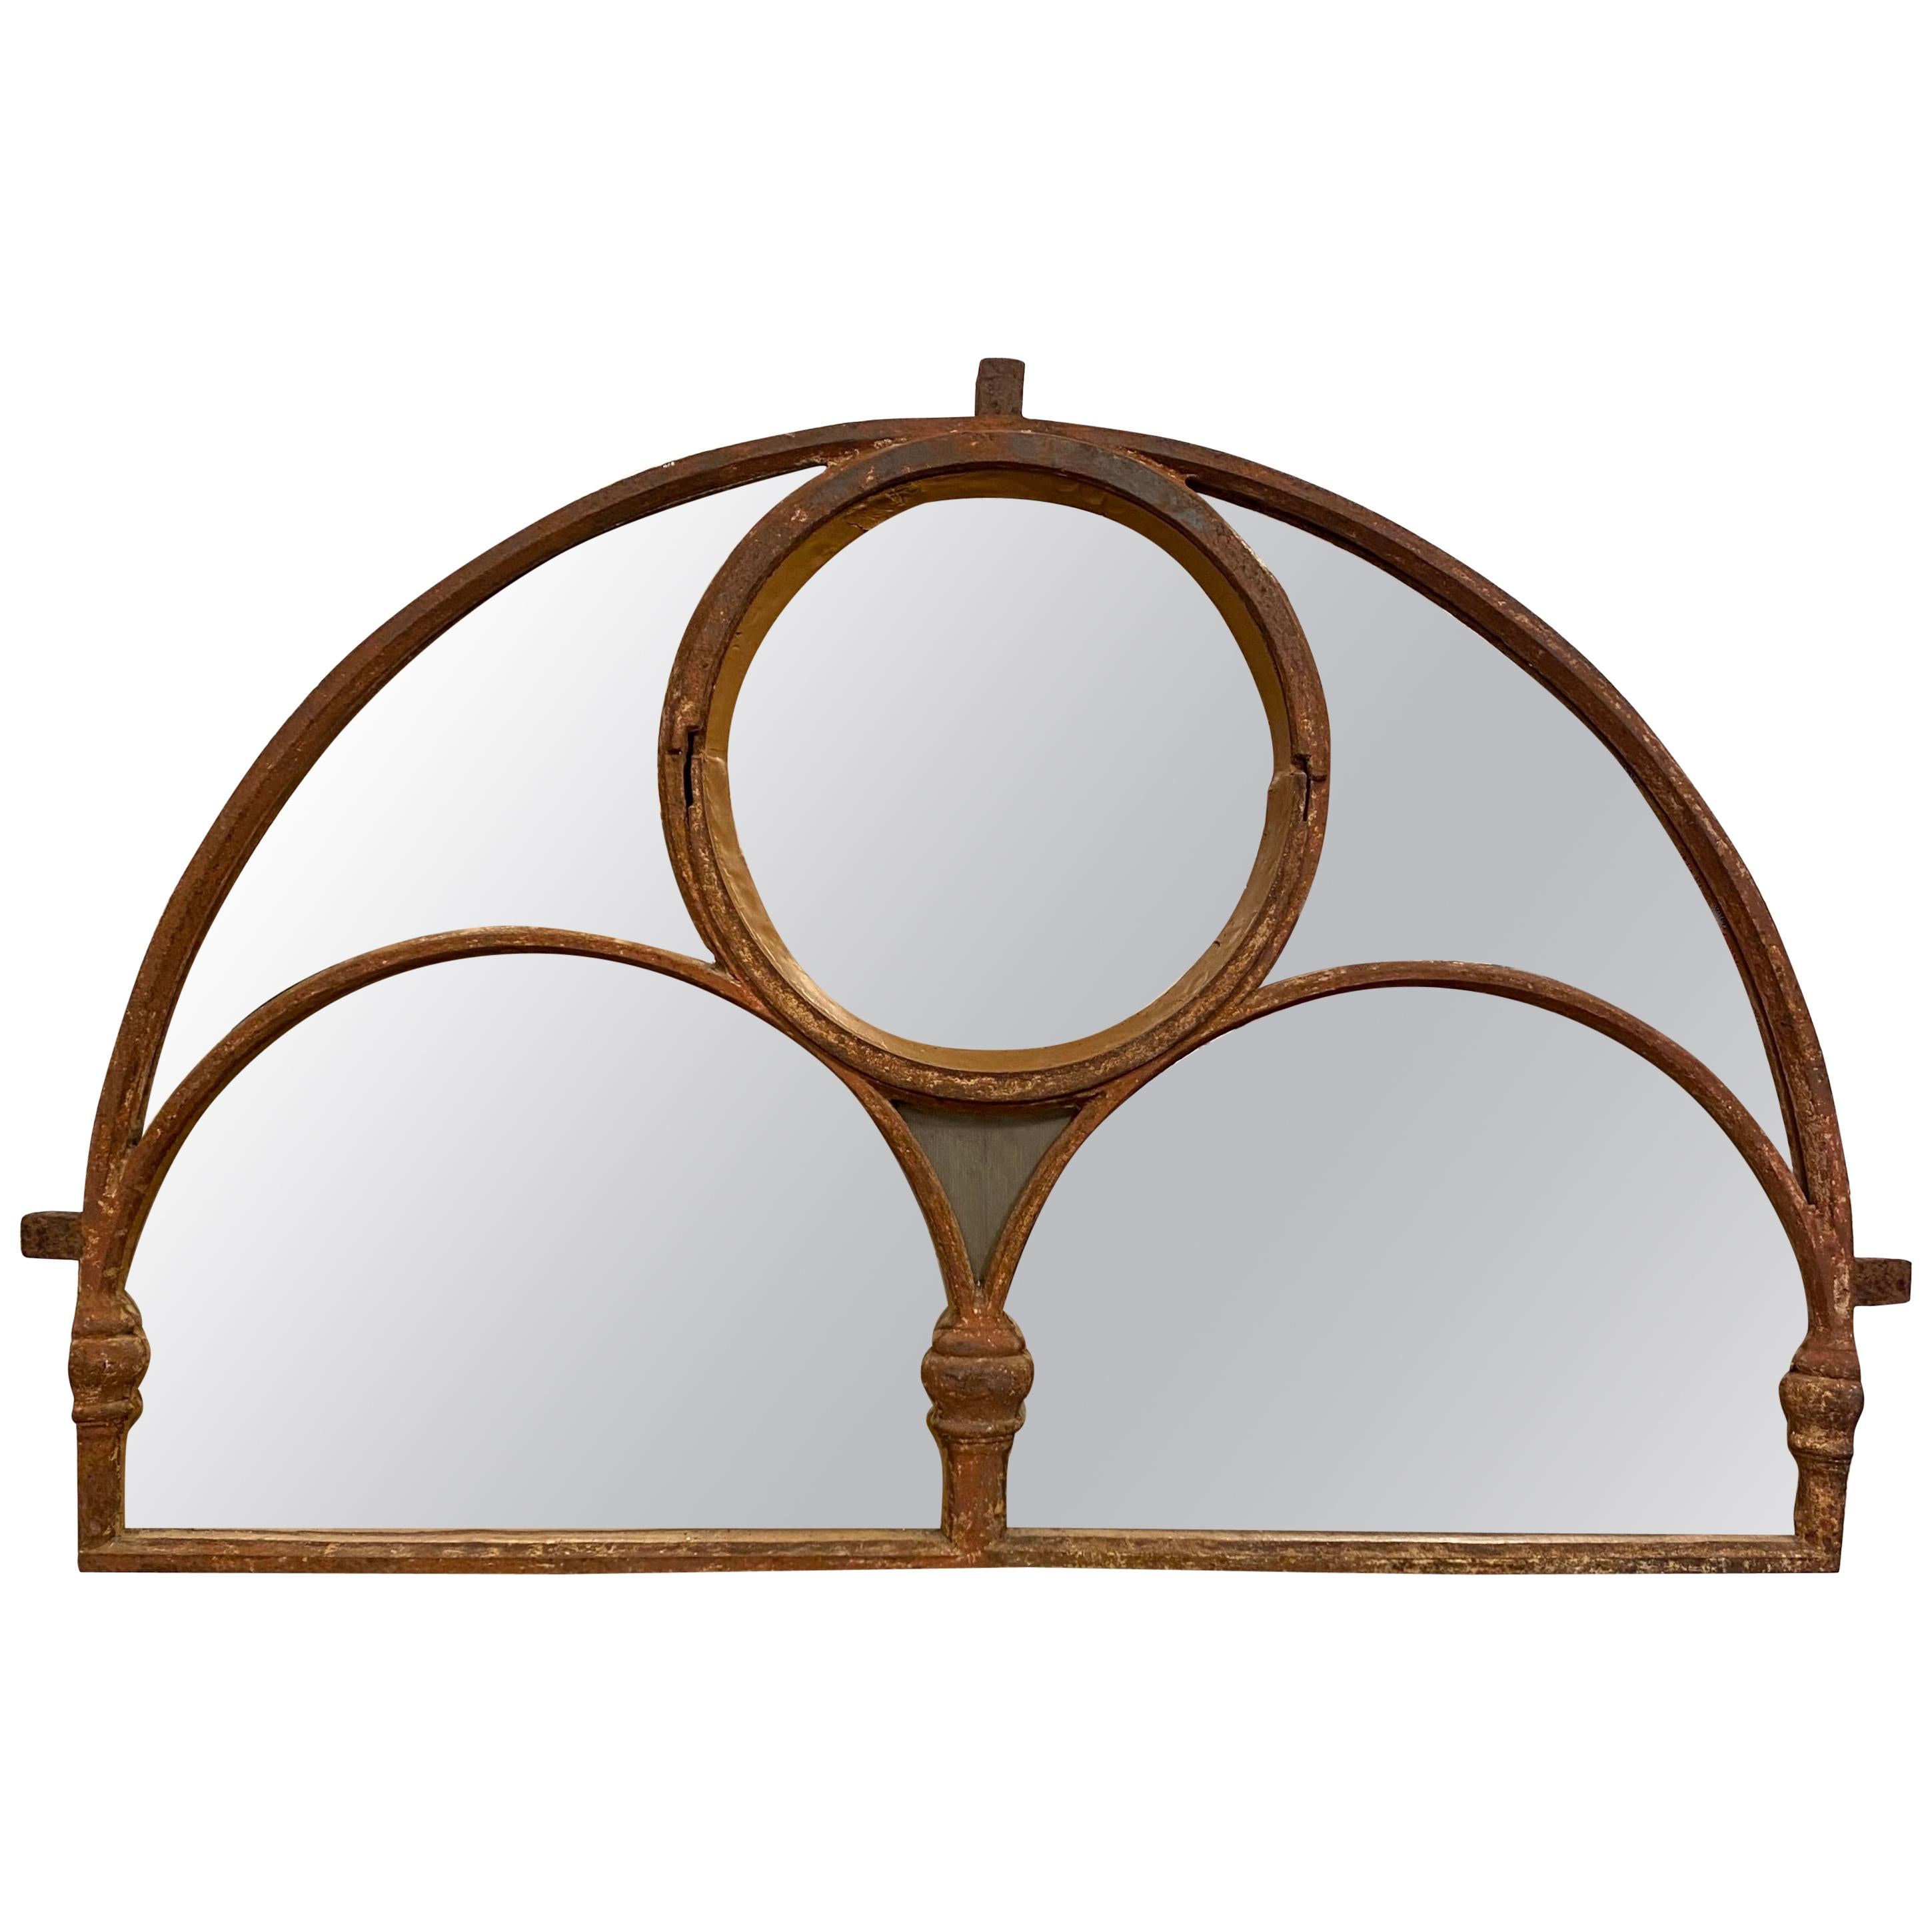 Large Victorian Cast Iron Arched Window Mirror from The Old Brighton Aquarium